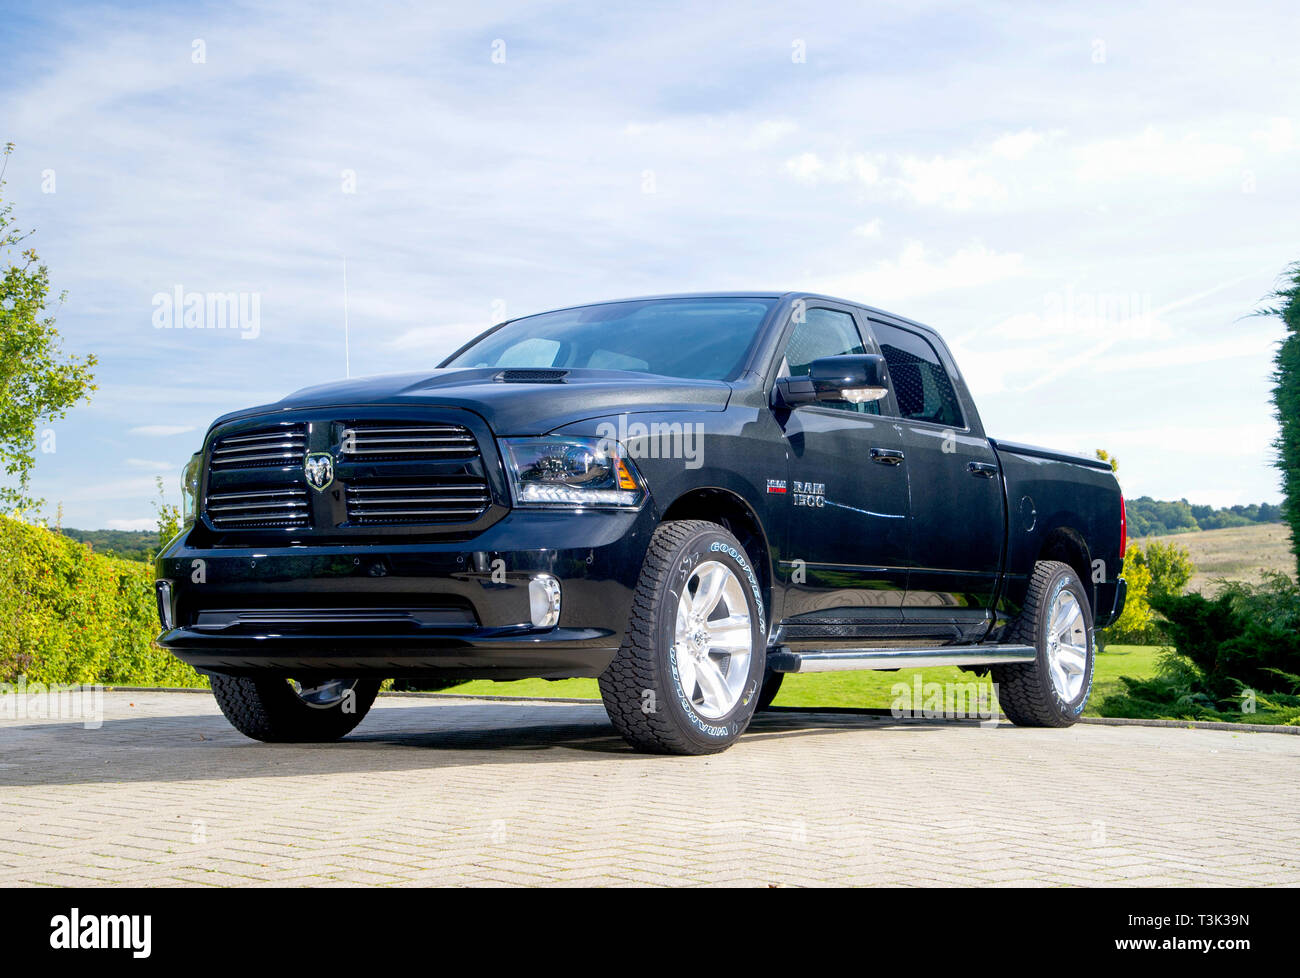 2025 Ram 1500 REV Price, Pictures, Release Date & More